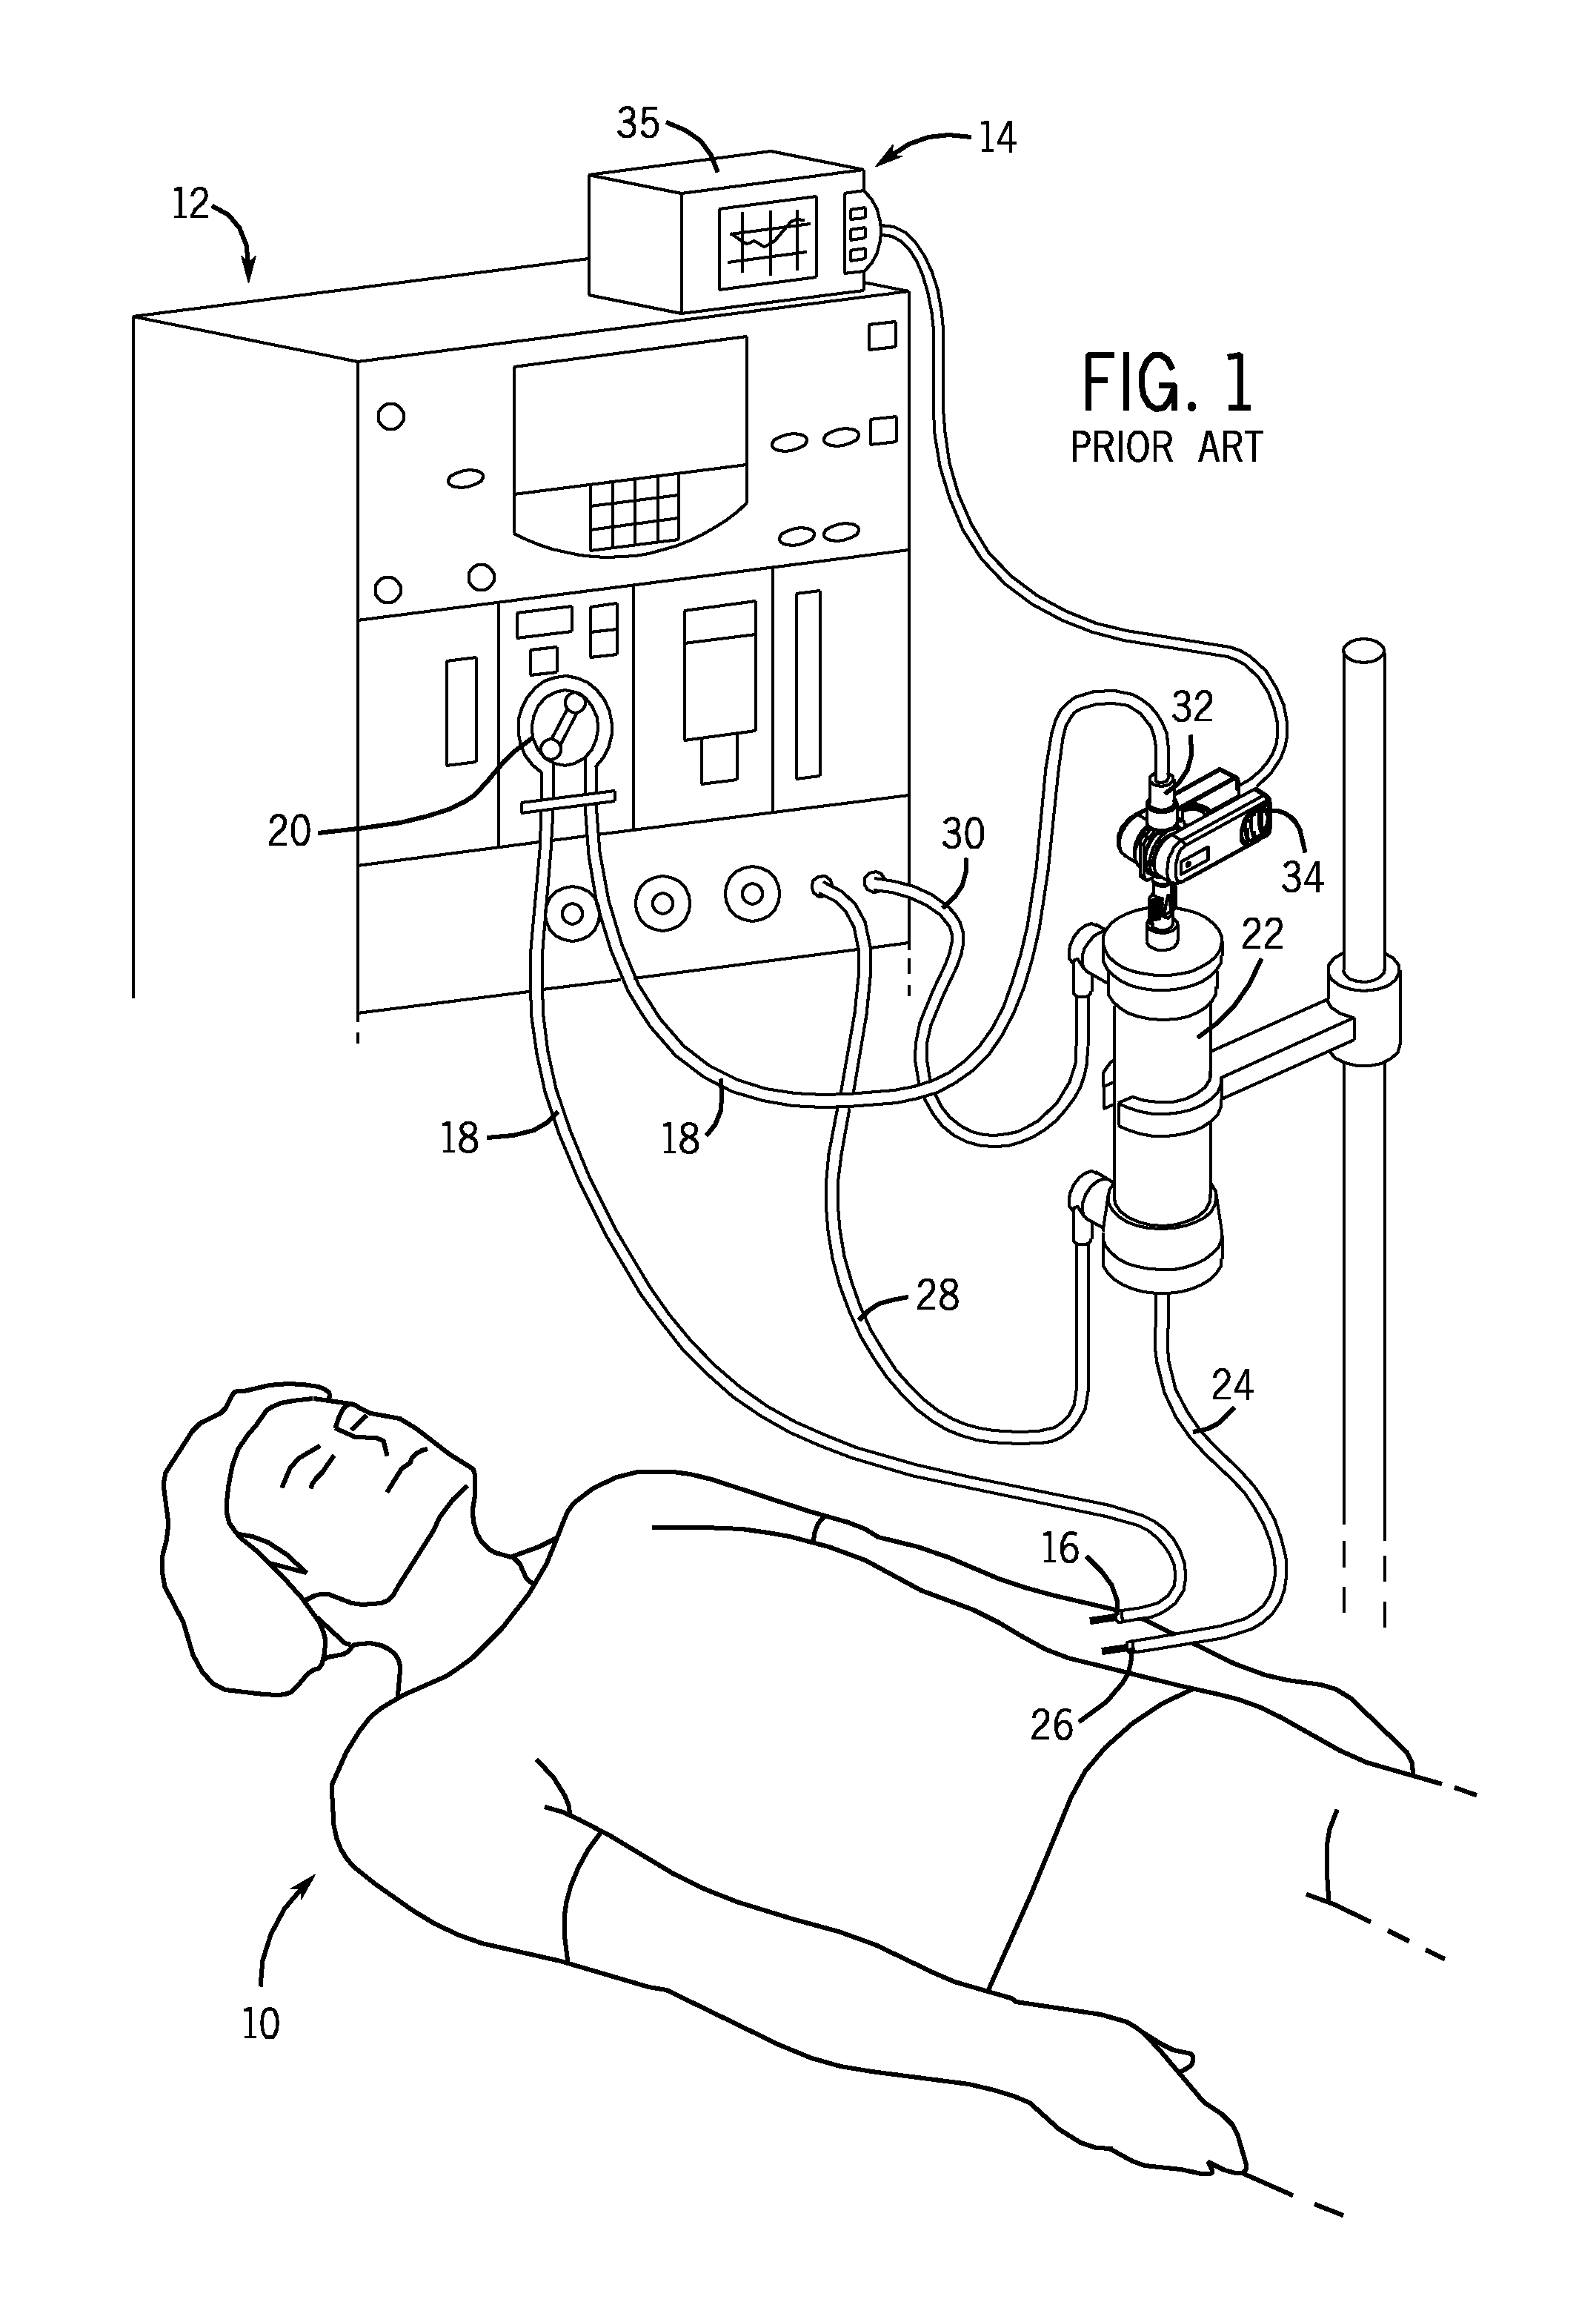 Shrouded sensor clip assembly and blood chamber for an optical blood monitoring system